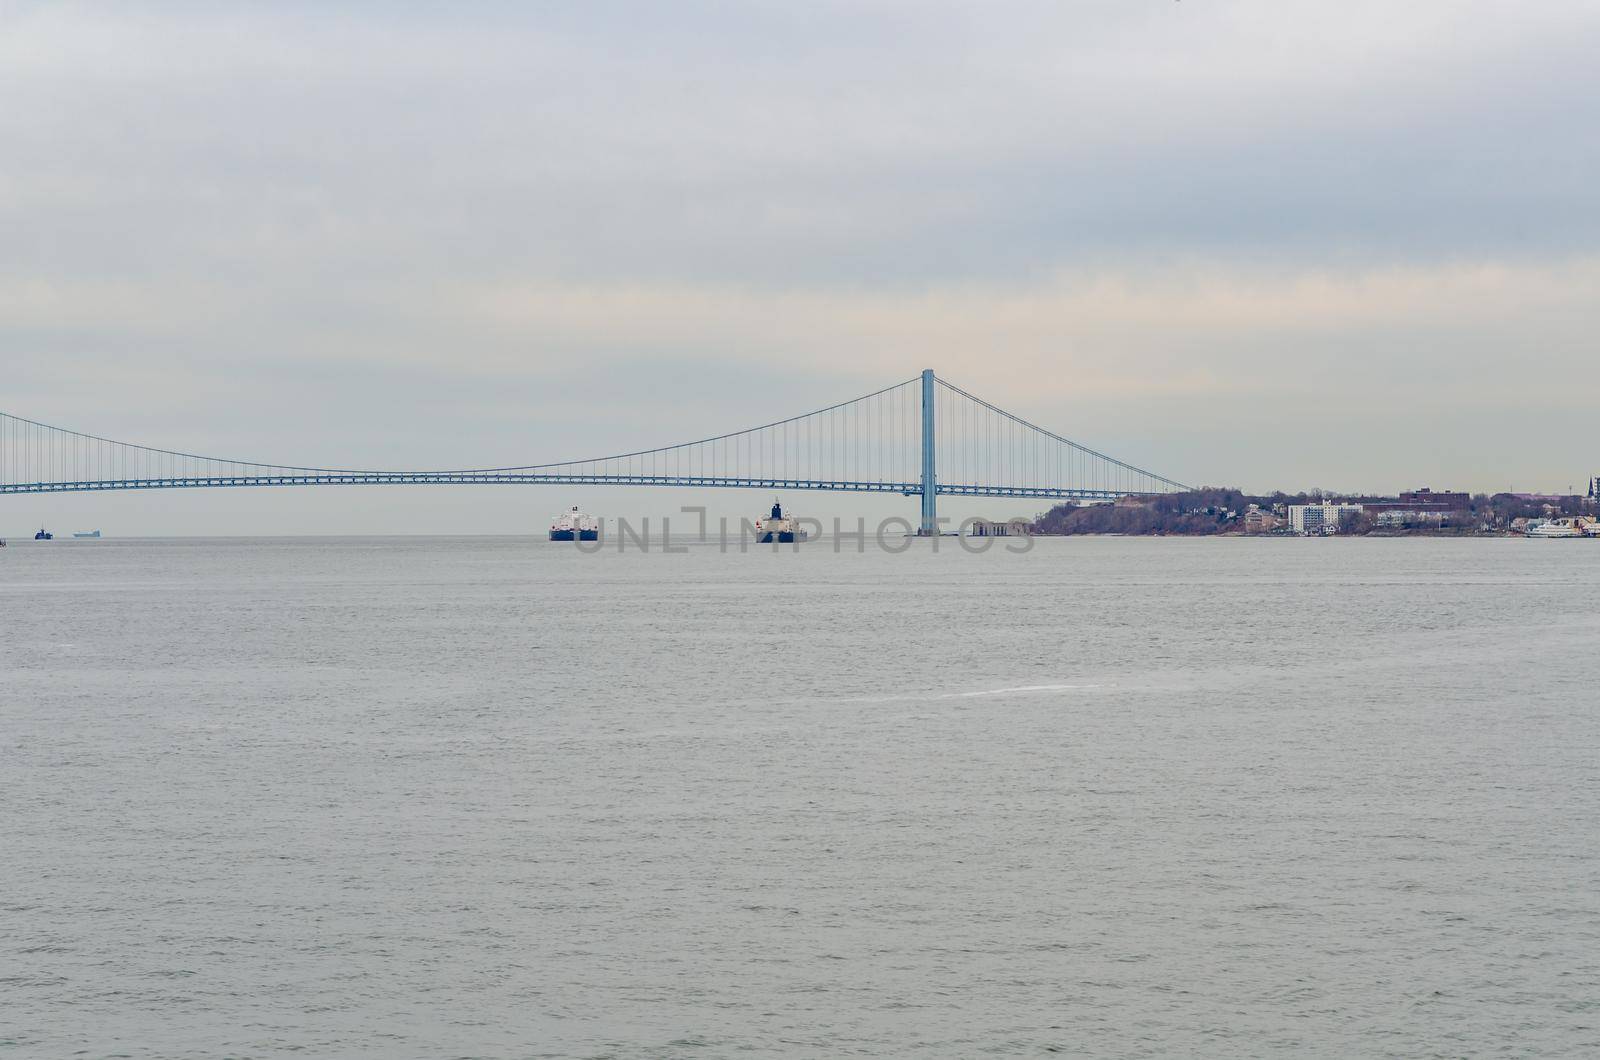 Two industrial ships underneath blue Verrazano-Narrows Bridge, New York City, at the horizon, during winter evening with overcast, horizontal